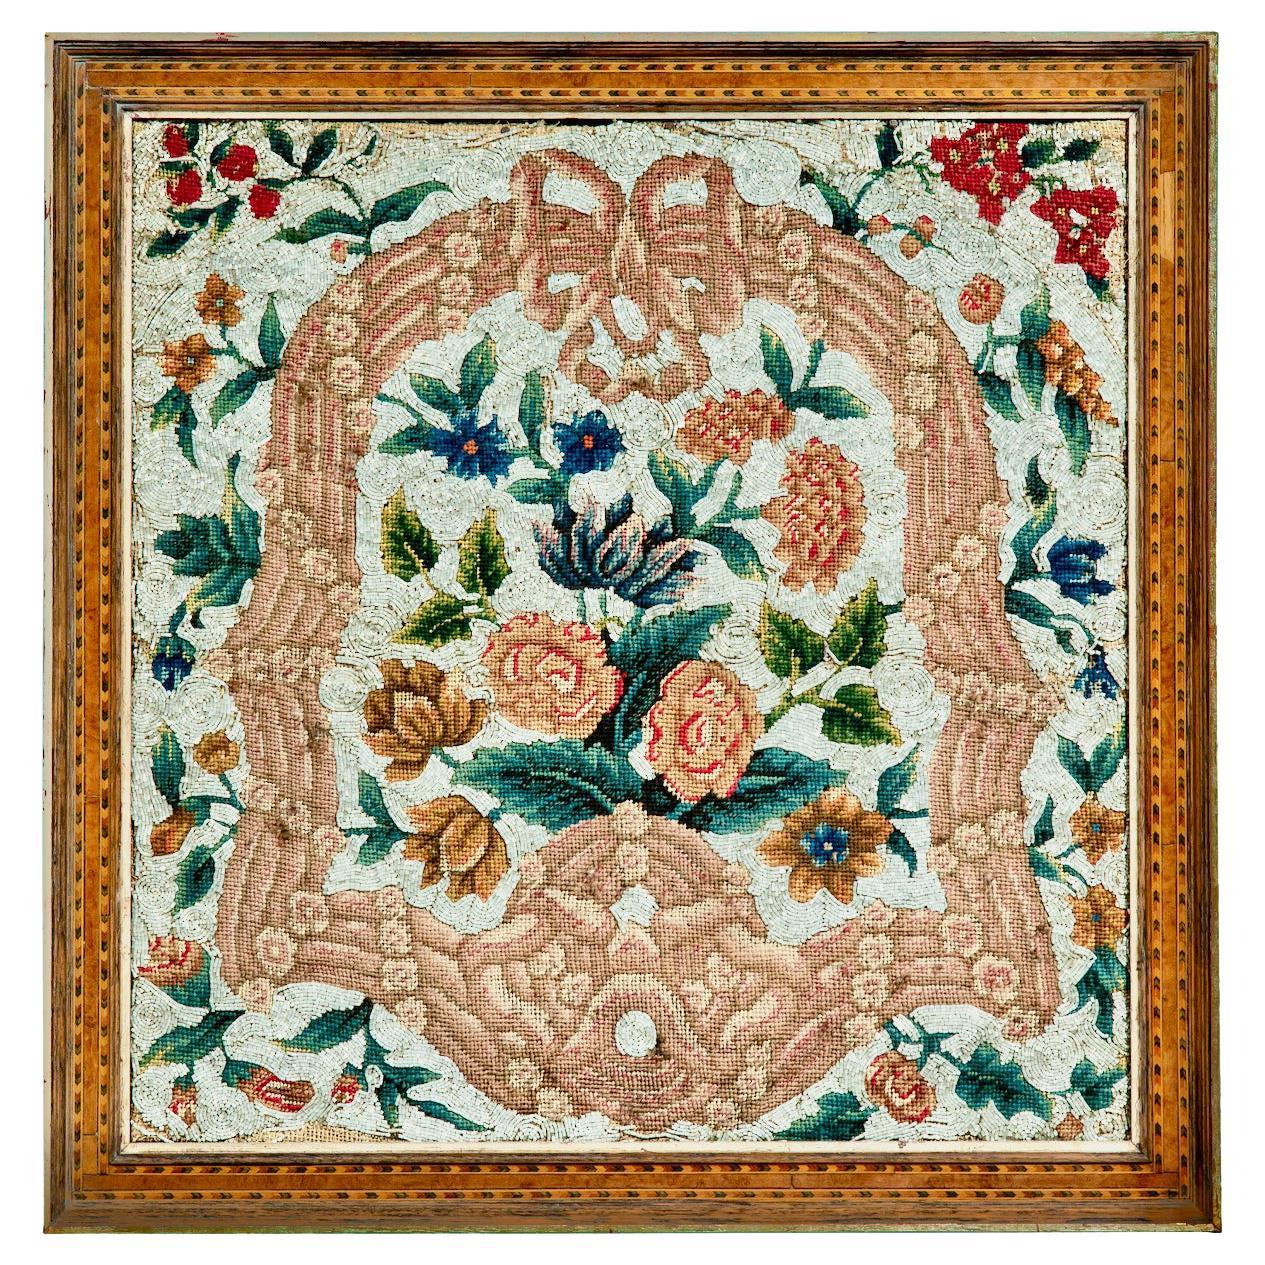 Antique Beadwork Tapestry Picture, Early 19th Century